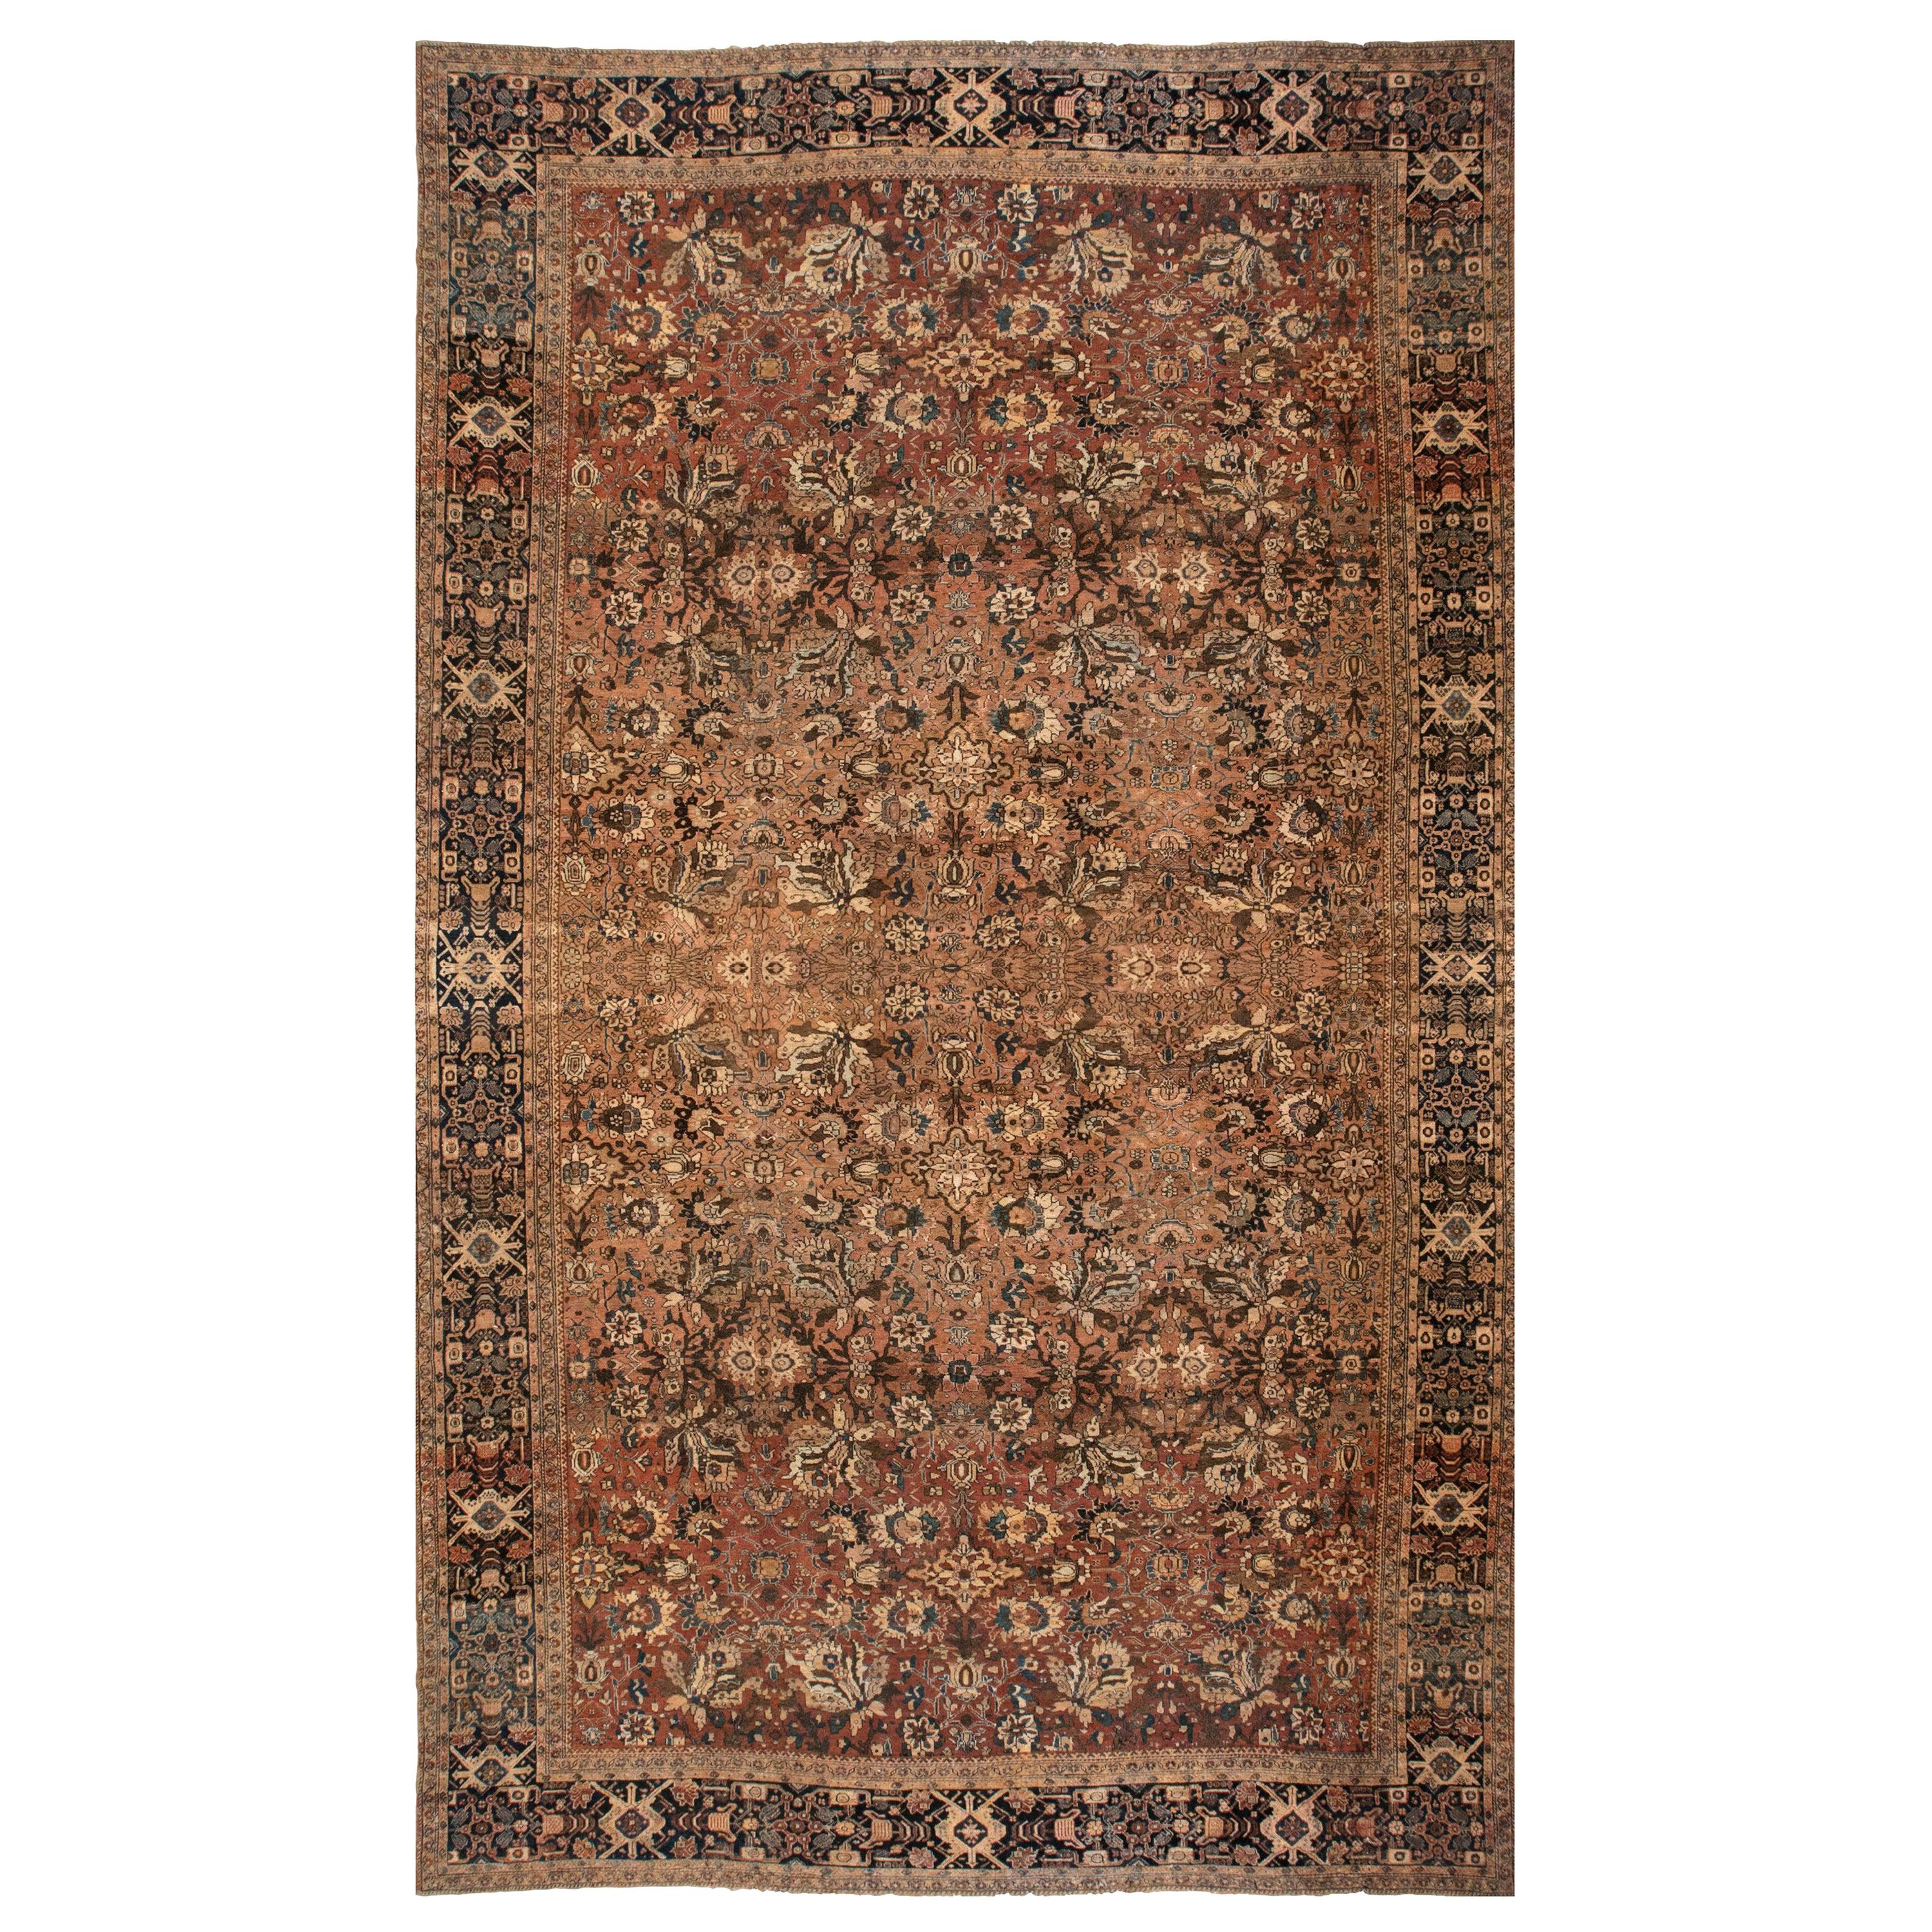 Antique Persian Sultanabad Brown Handwoven Wool Rug